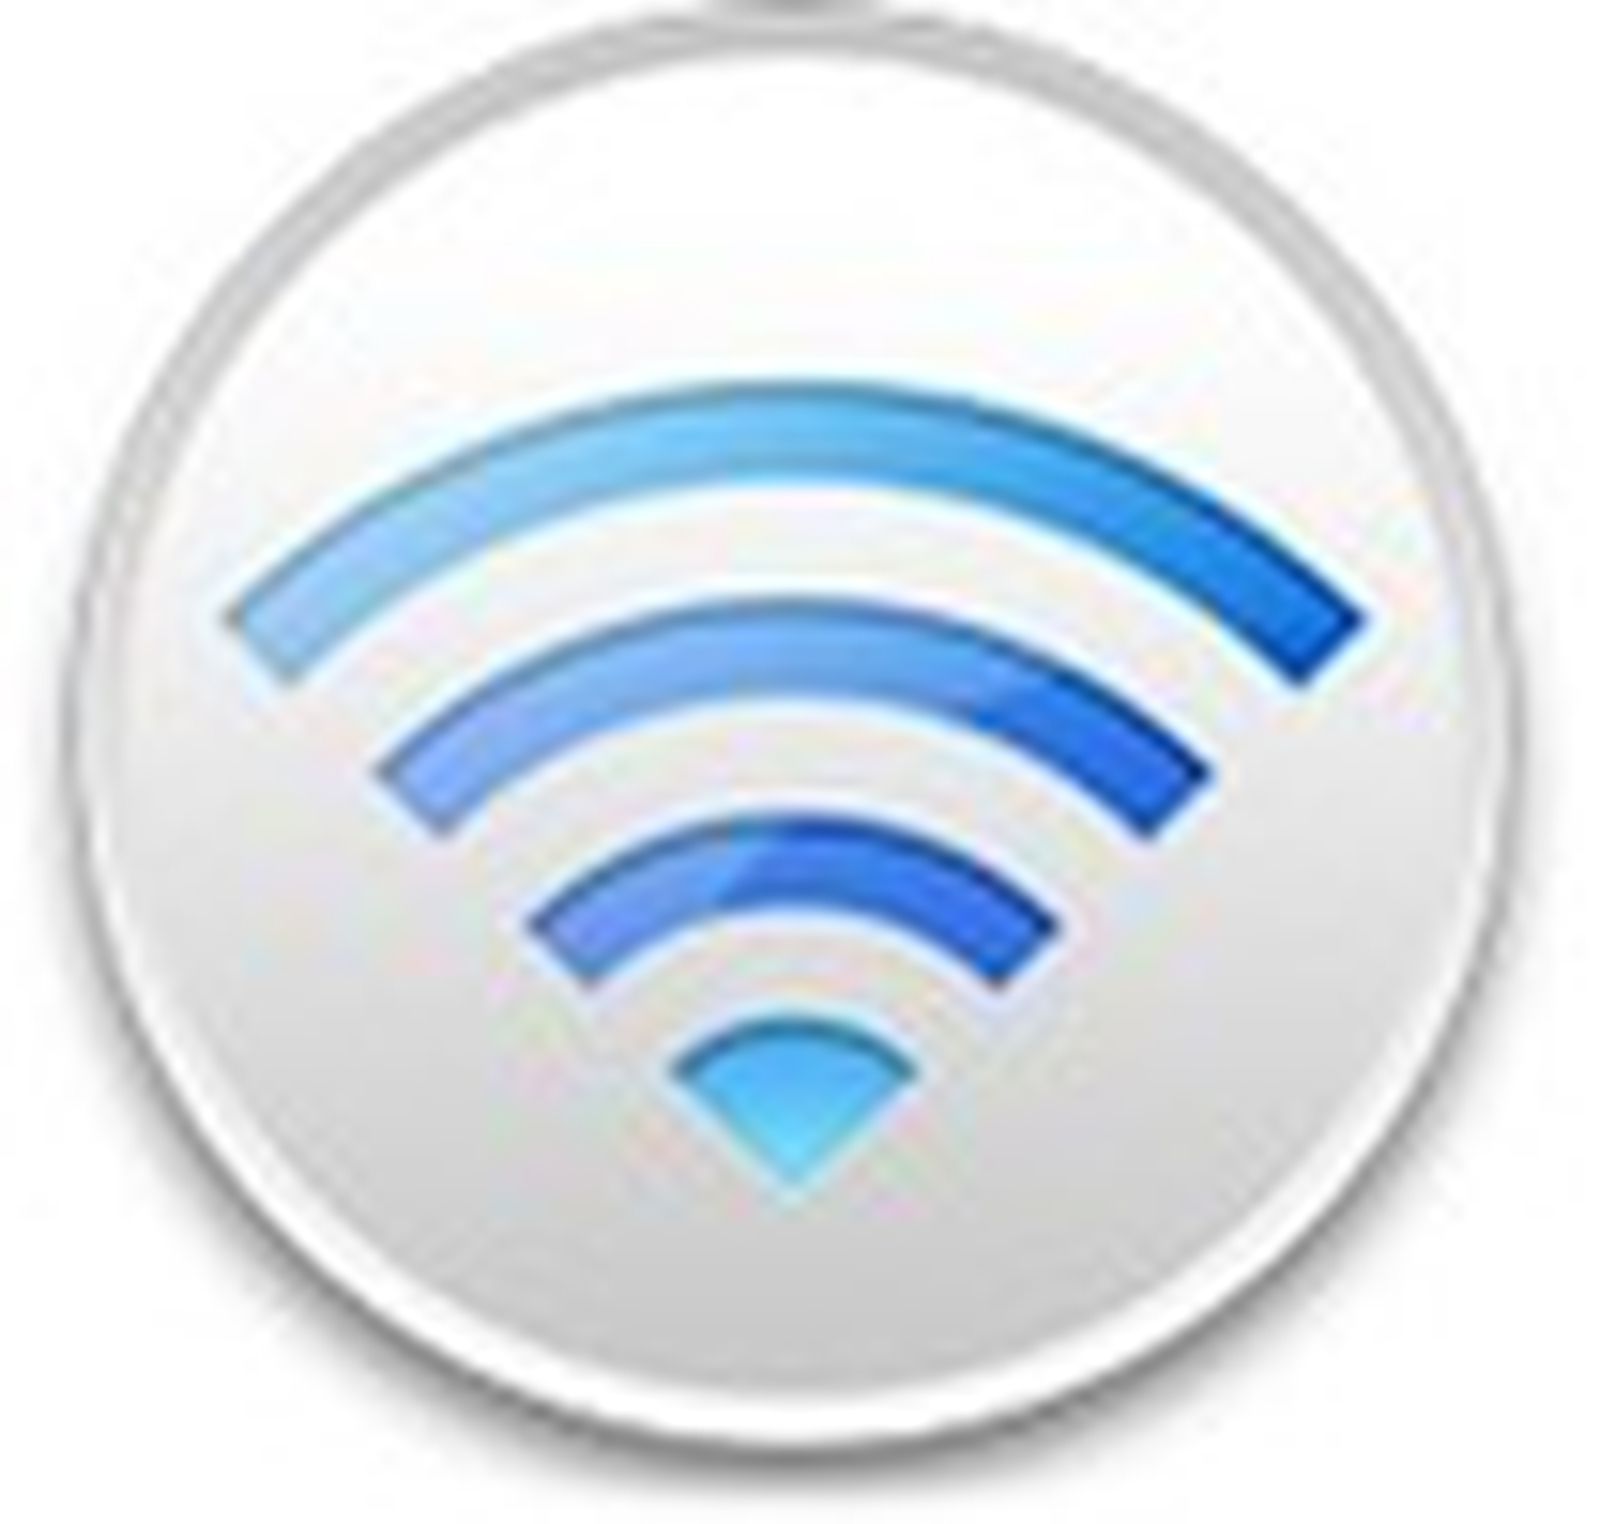 download apple airport utility for mac